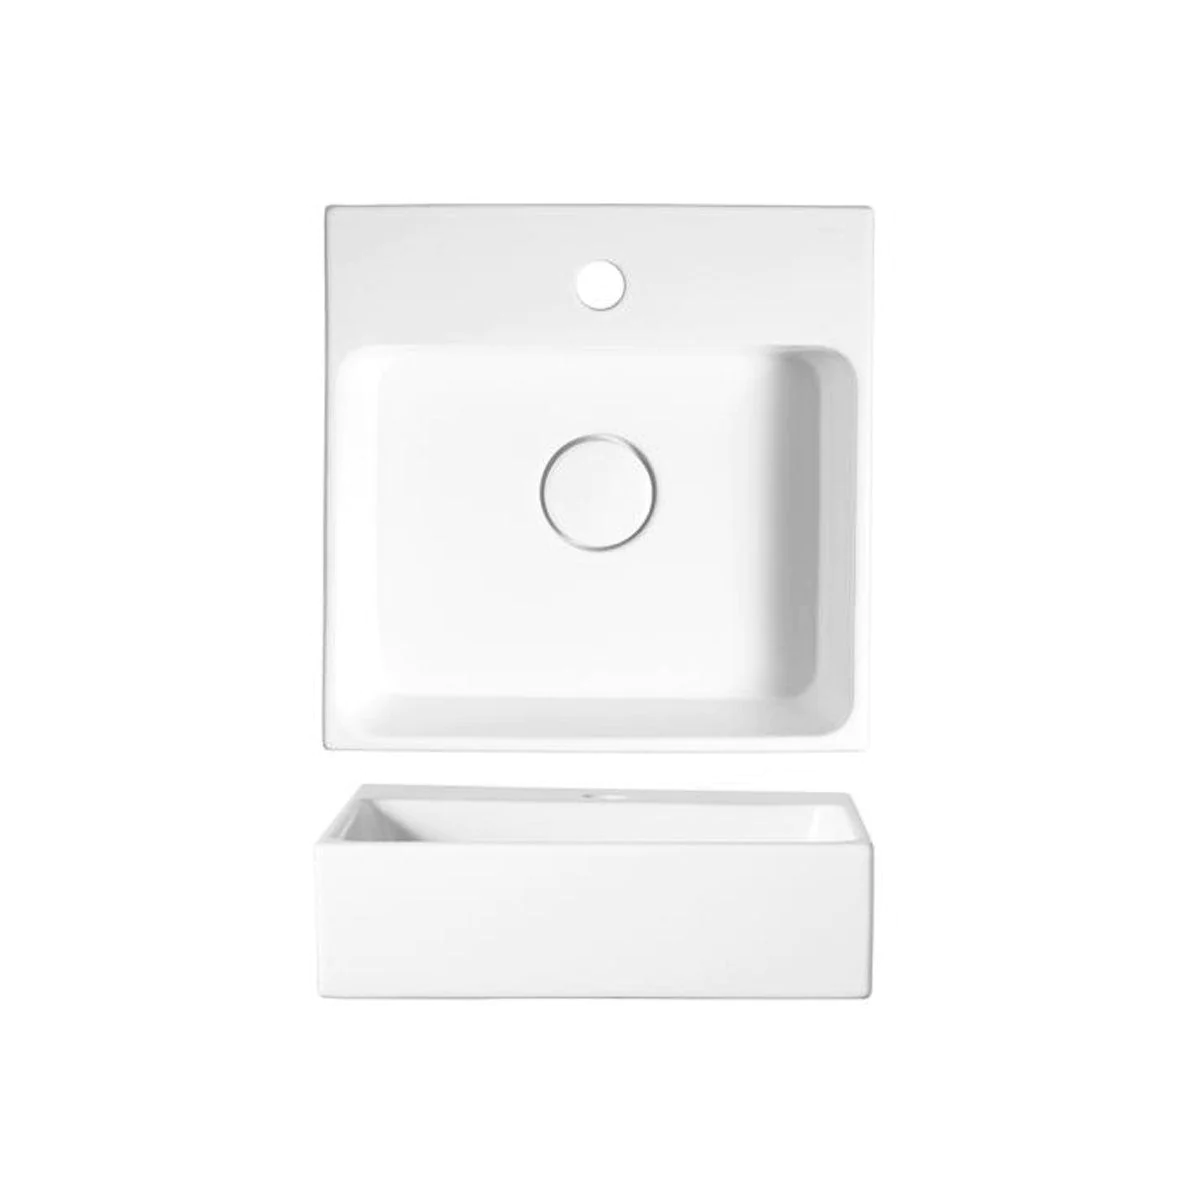 VEROTTI LAVENDER ABOVE COUNTER/WALL MOUNTED FIRECLAY BASIN GLOSS WHITE 450MM